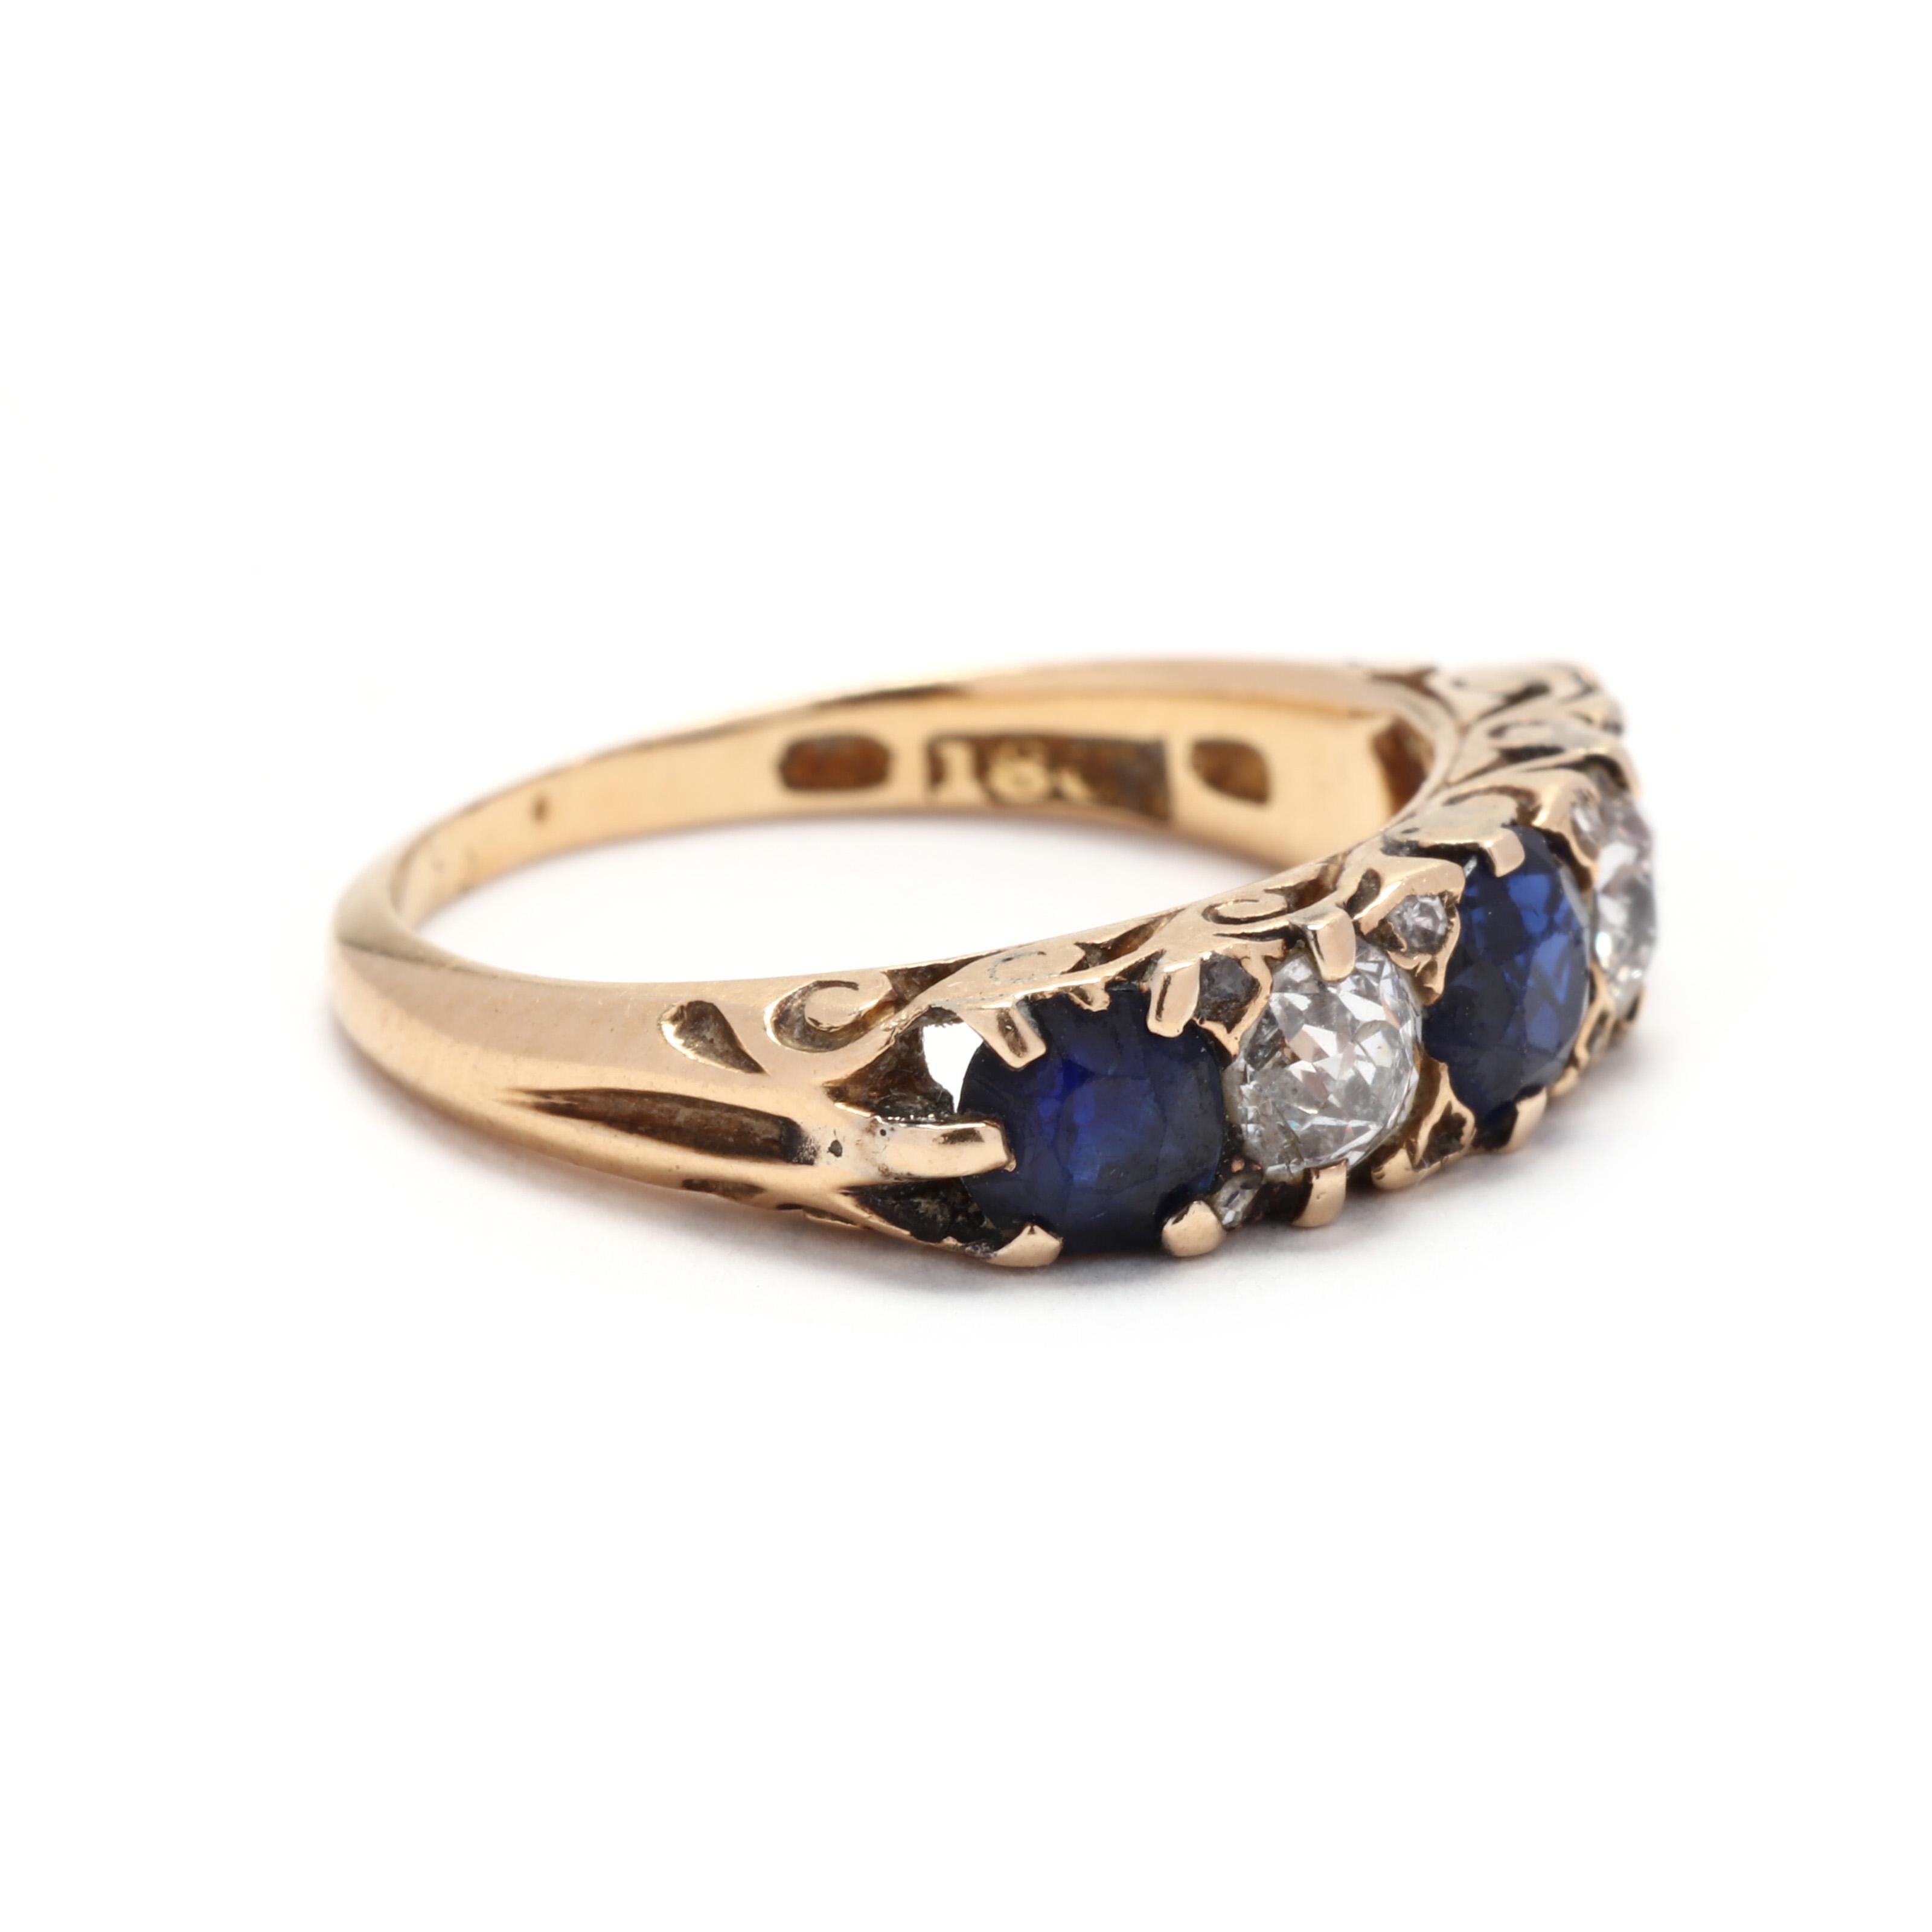 A Victorian 18 karat yellow gold diamond and sapphire five stone band. This stackable band features alternating round cut sapphires weighing approximately 1.10 total carats and old European cut diamonds weighing approximately .50 total carats, with